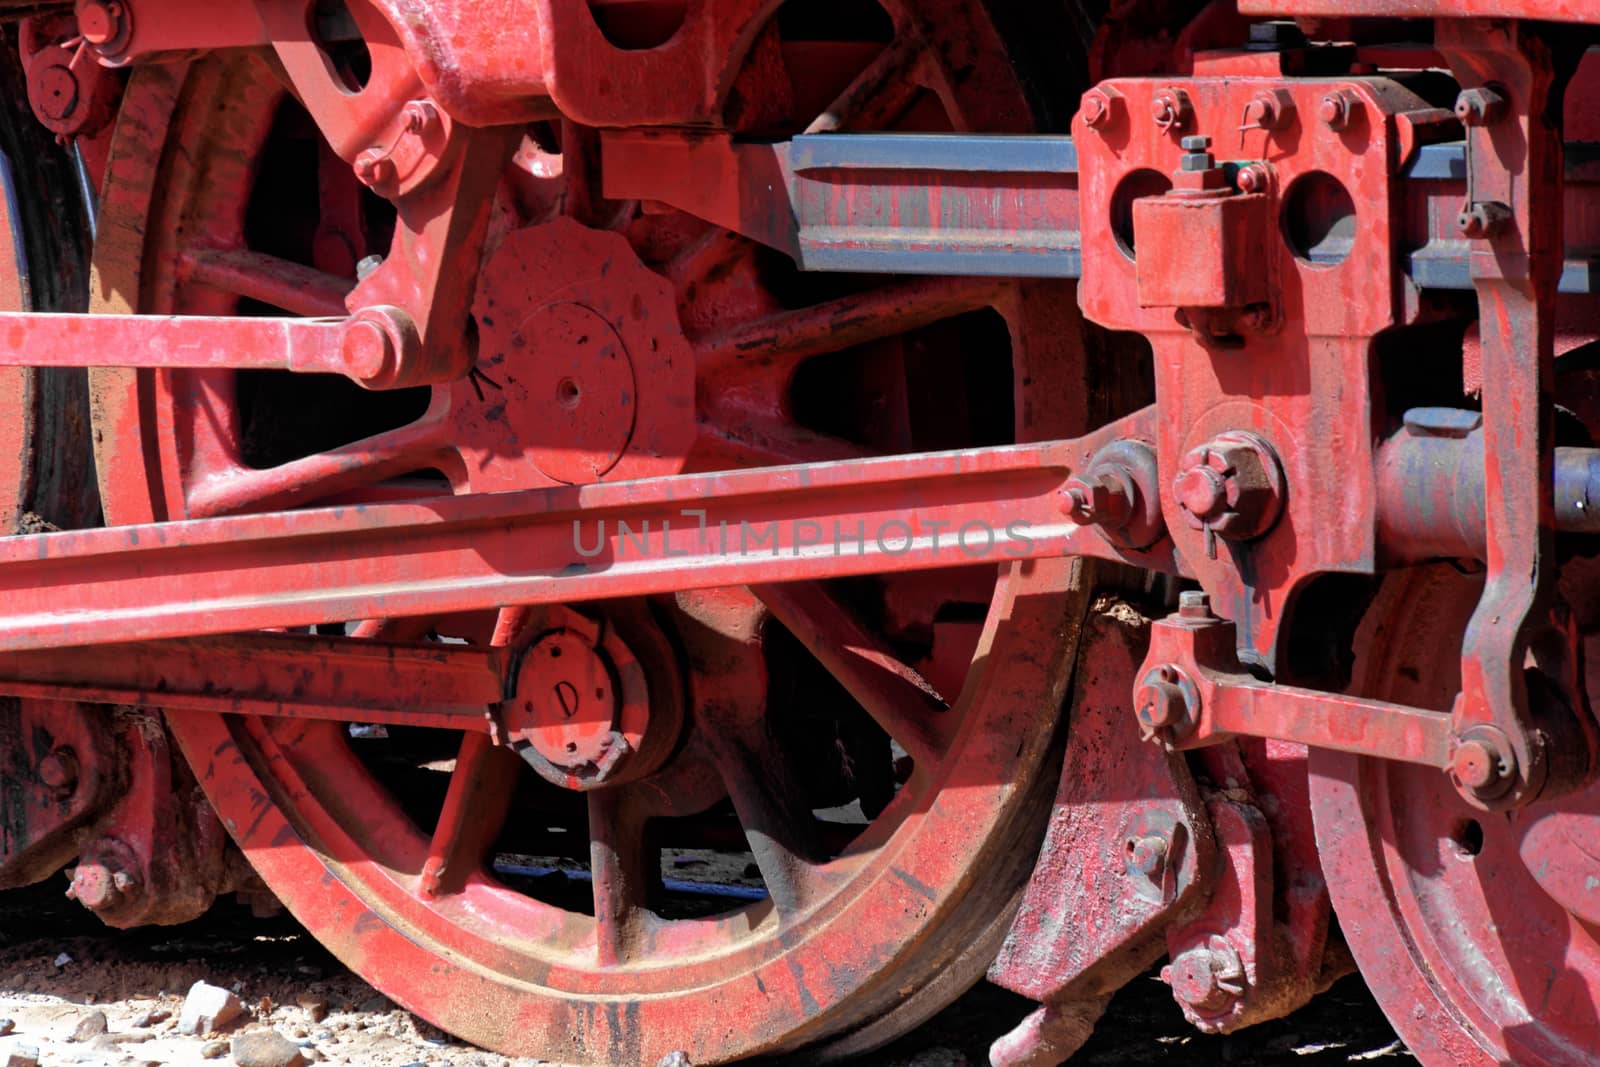 Detail of the steam locomotive, still in use, in the desert of Wadi Rum, Jordan by geogif